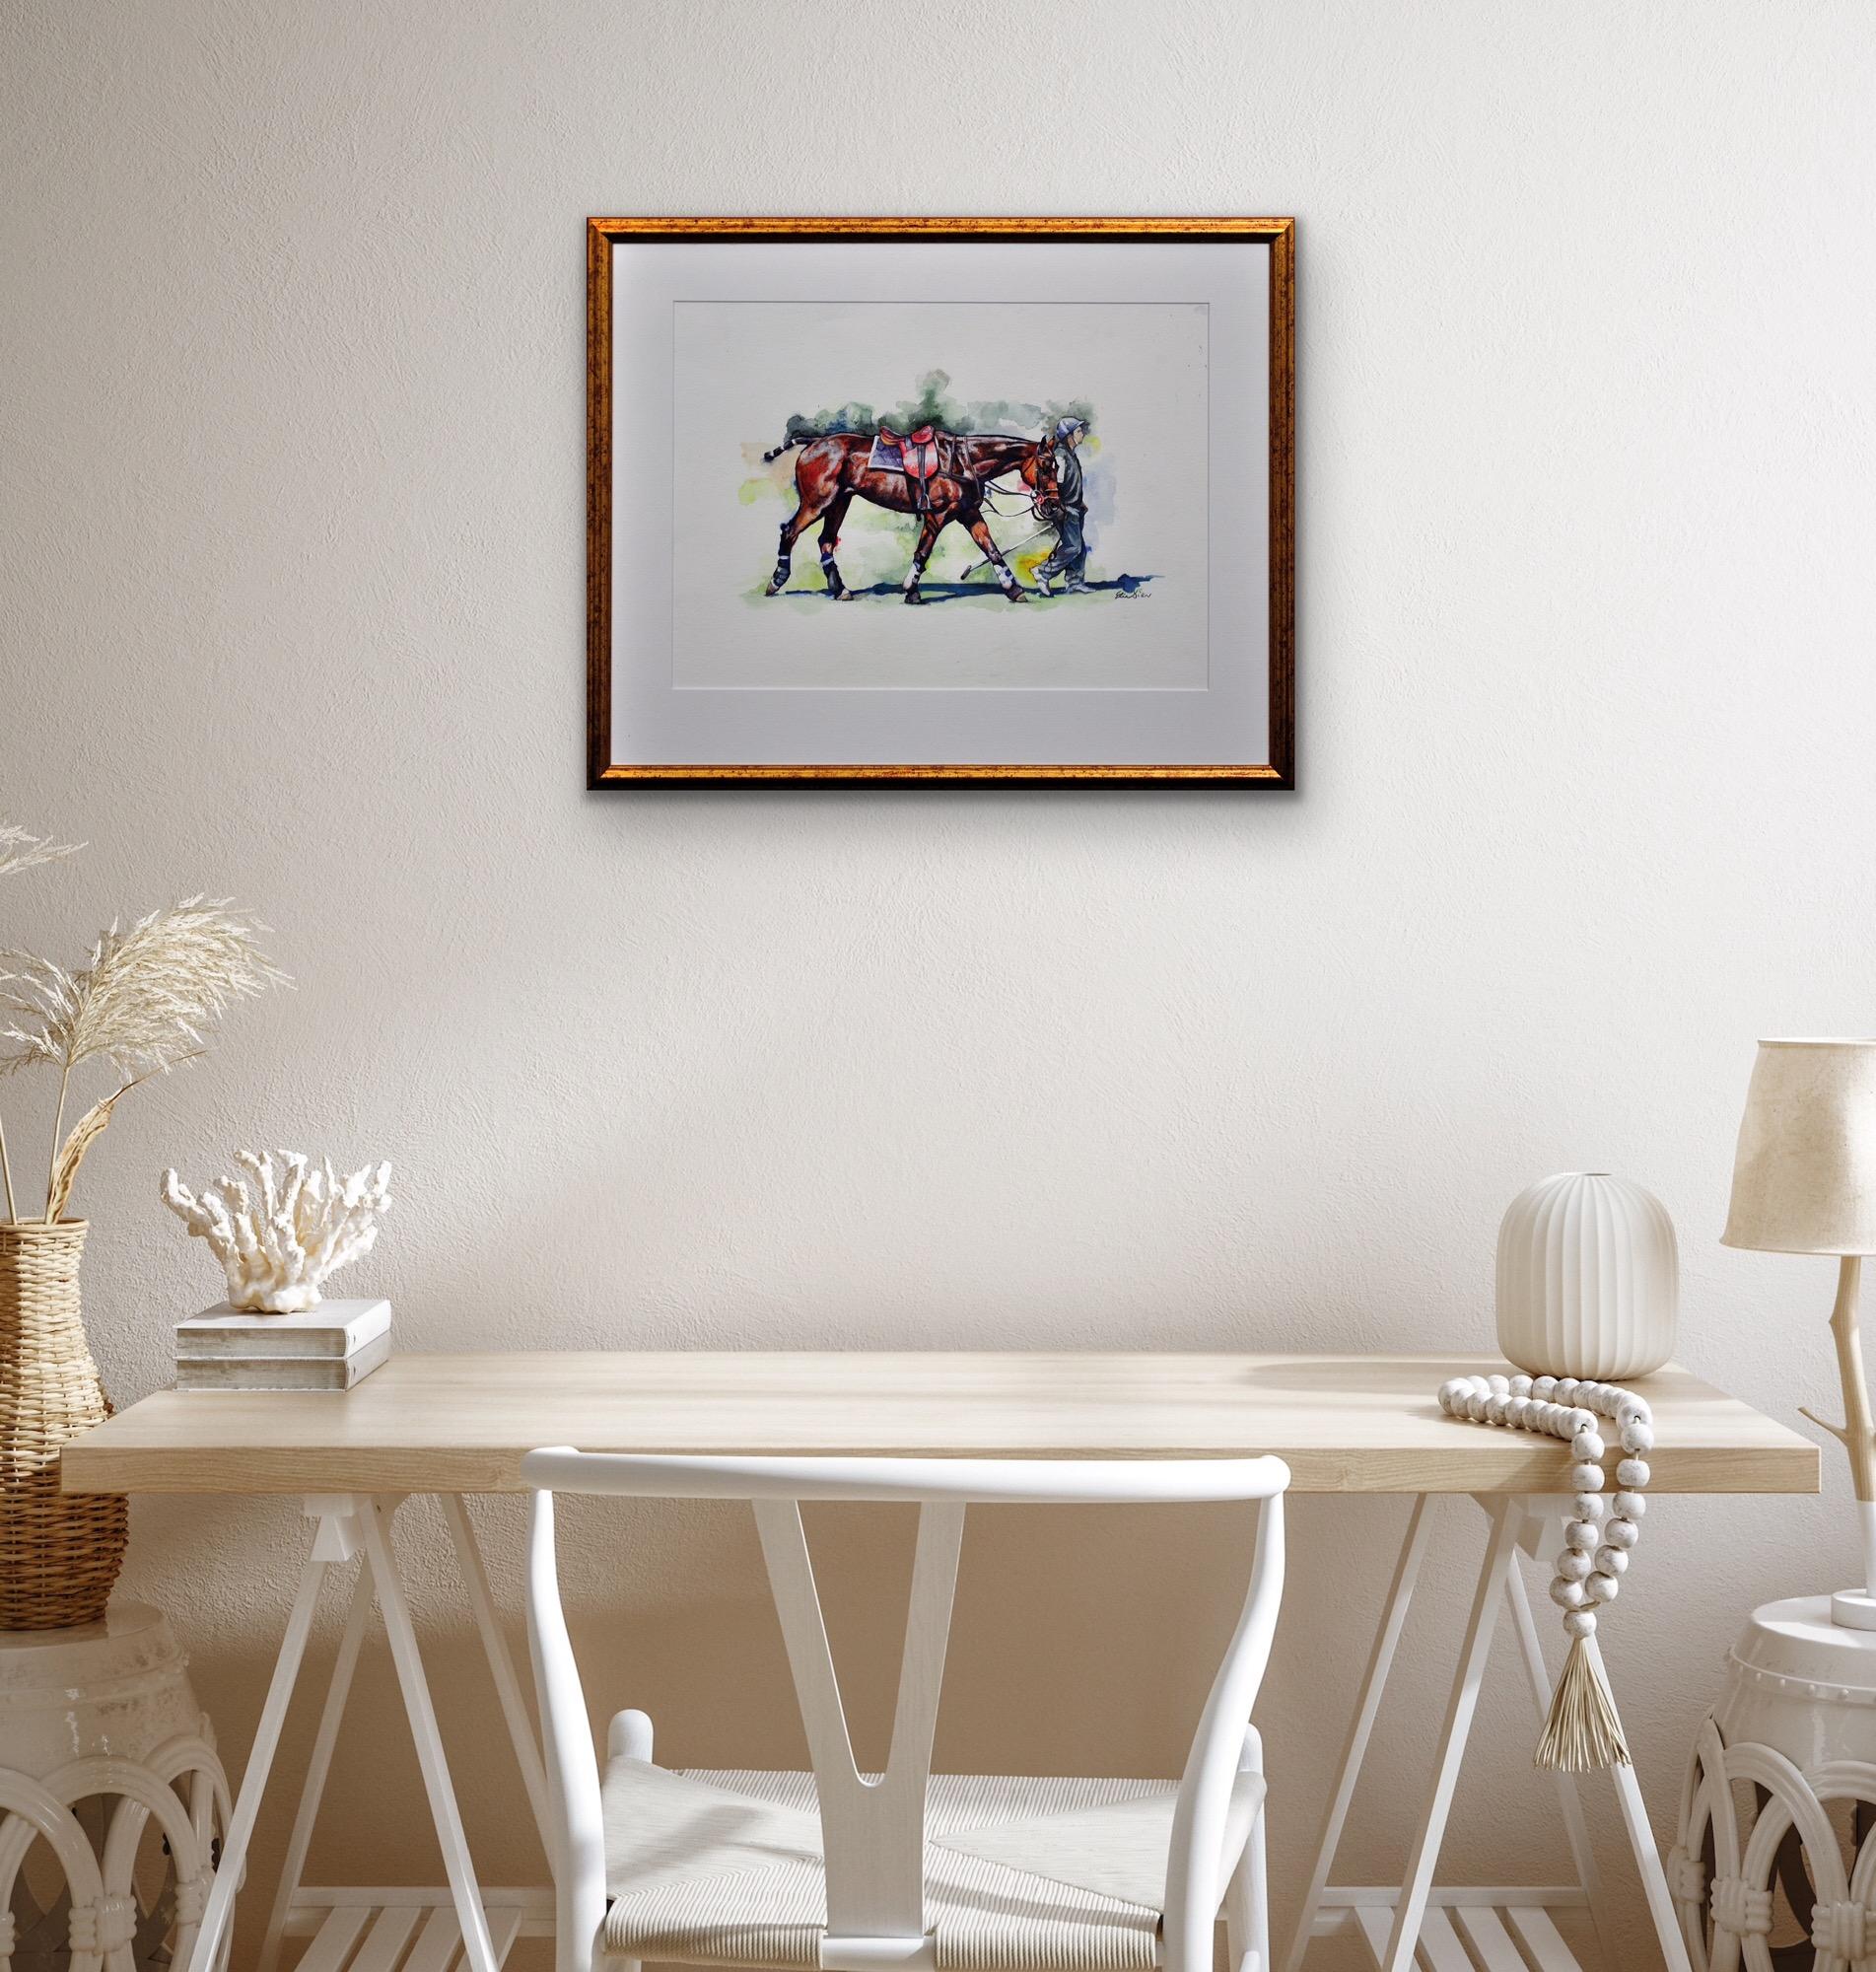 Polo Match, Cirencester, Player Leading Pony. Cotswolds. Framed Watercolor. For Sale 5